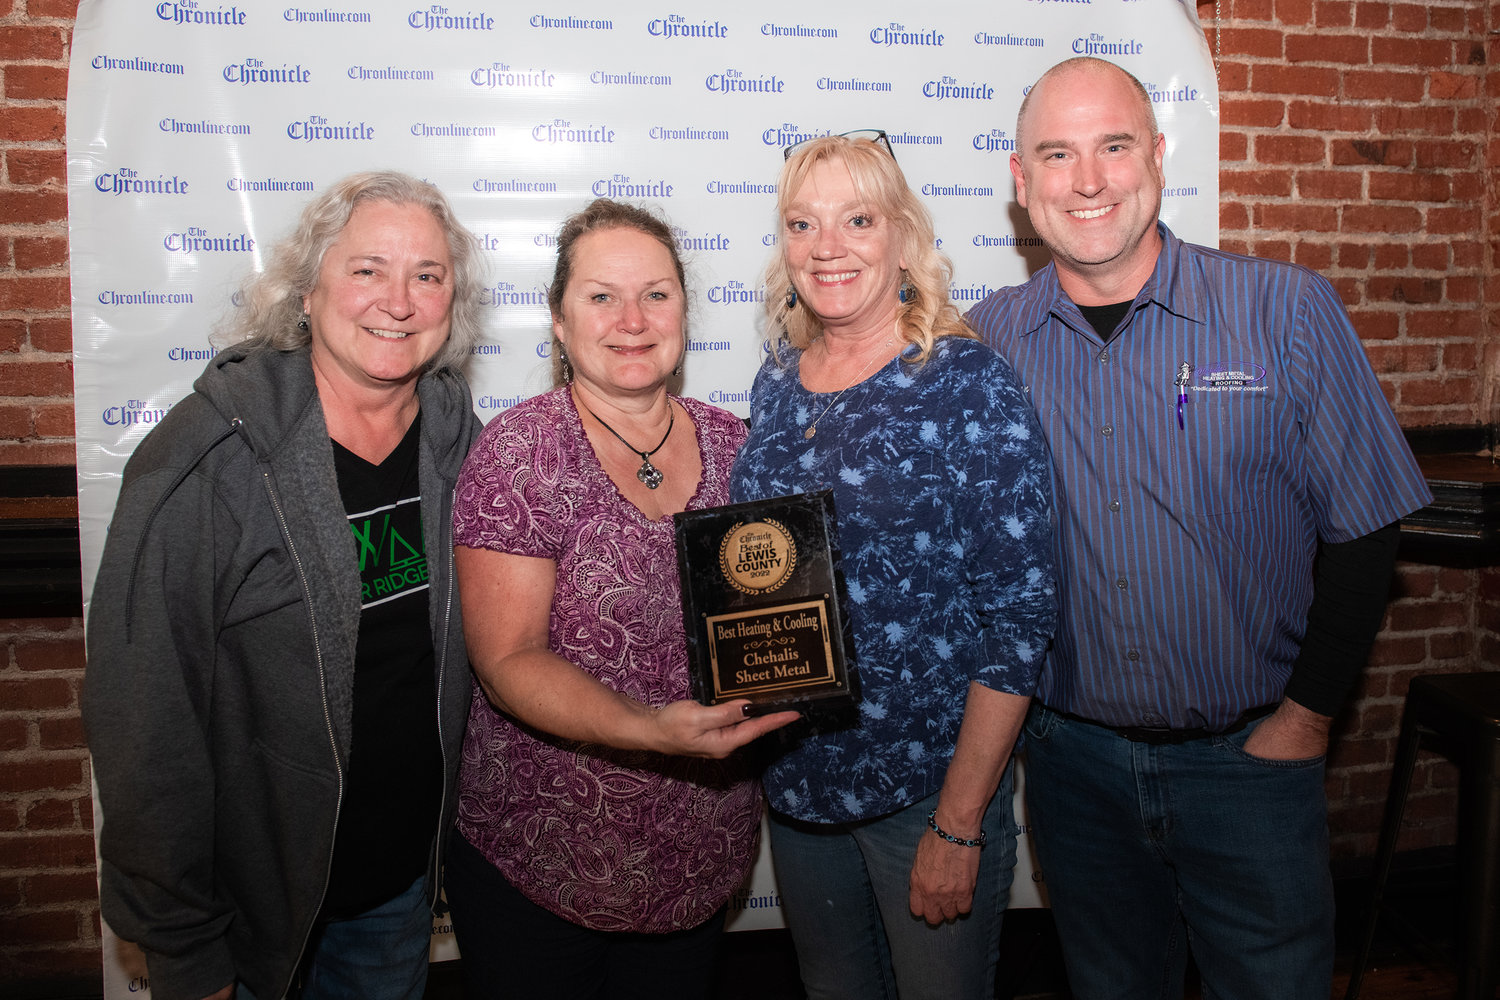 Chehalis Sheet Metal won “Best Heating and Cooling” during the 2022 Best of Lewis County event hosted by The Chronicle at The Juice Box Thursday evening in Centralia.